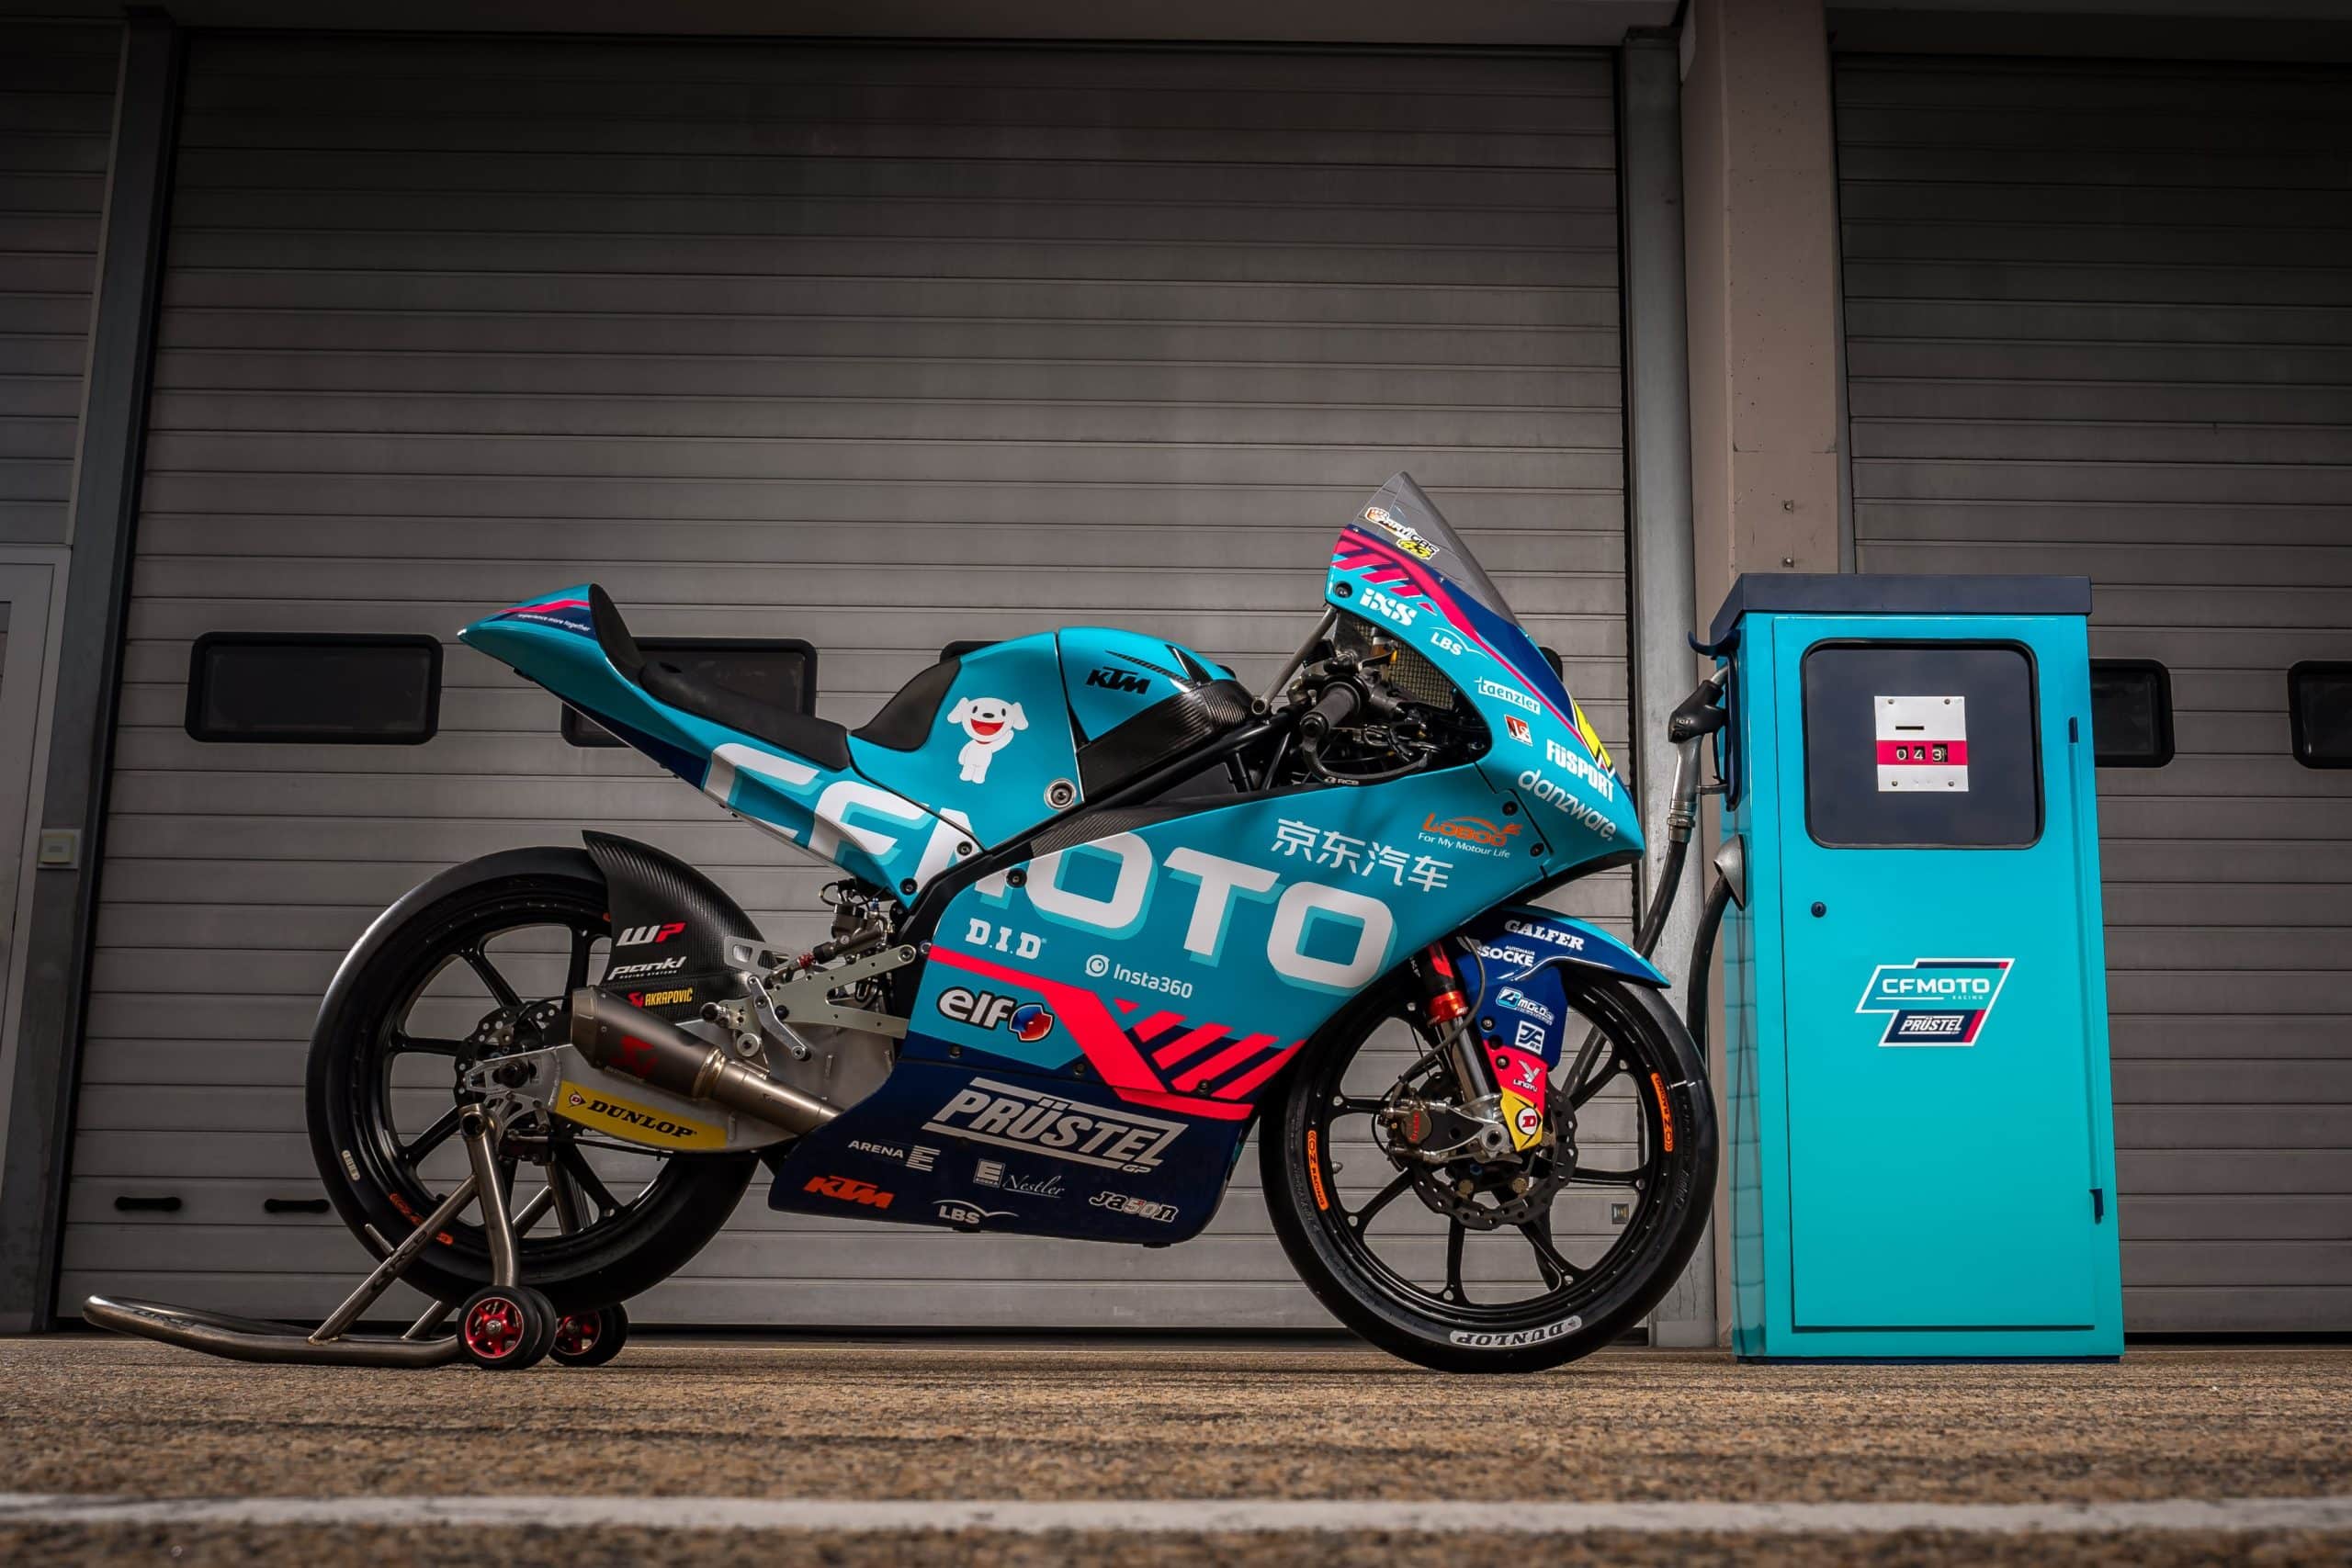 JD Auto to Make Moto3 Debut with CFMOTO - JD Corporate Blog